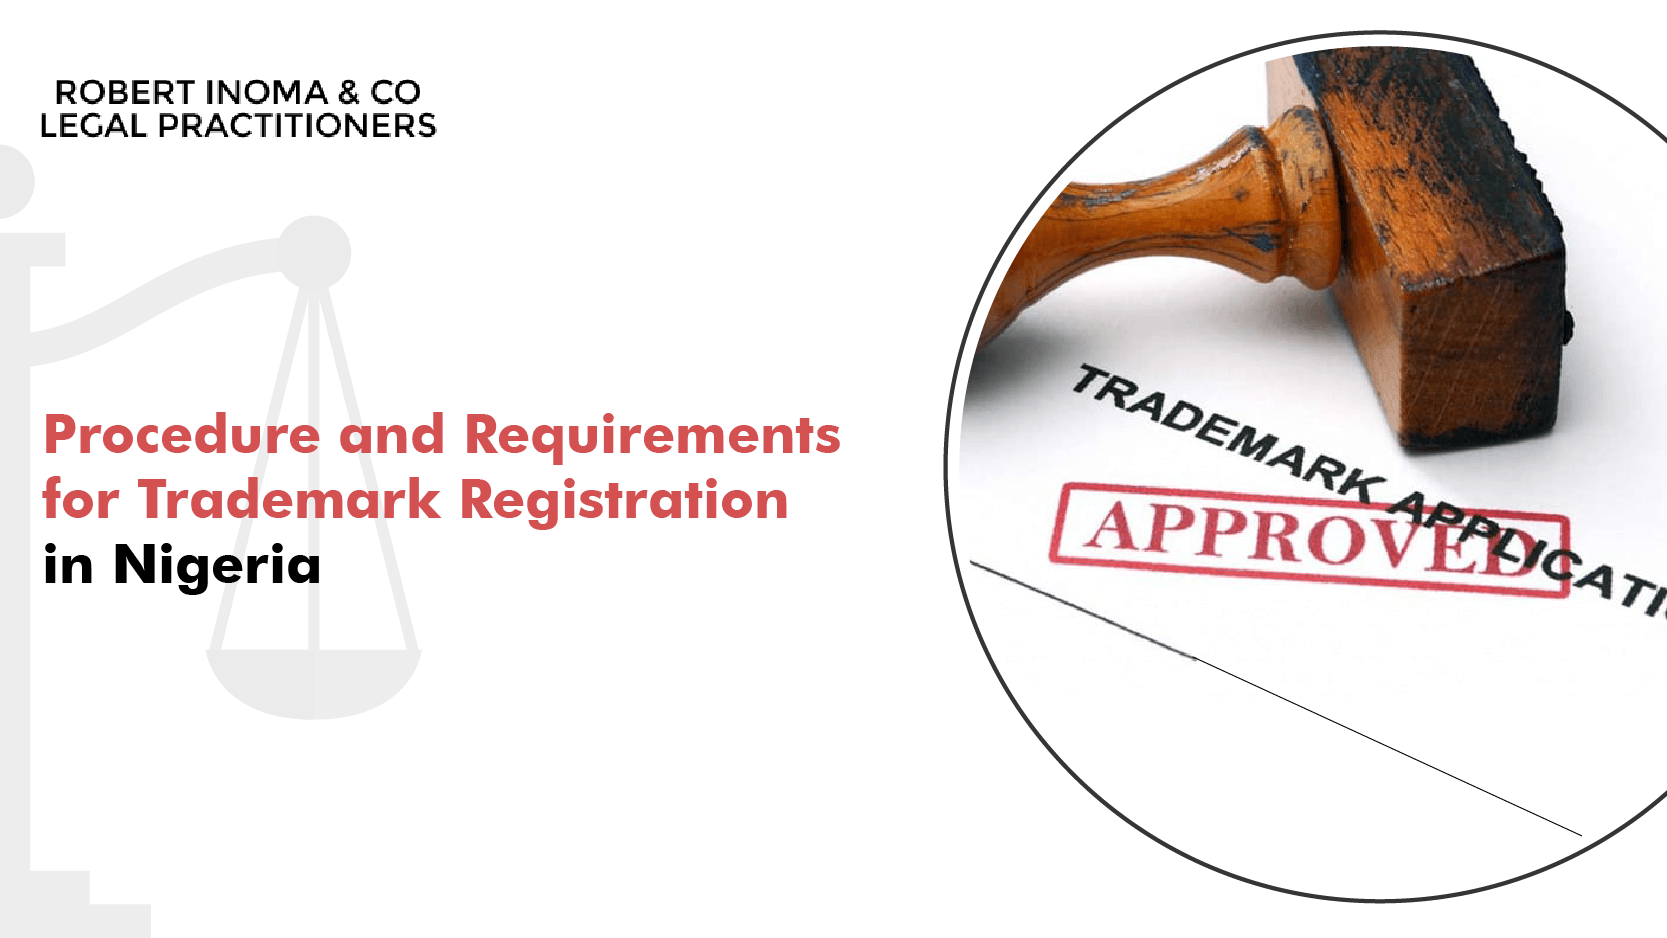 Procedure and Requirements for Trademark Registration in Nigeria